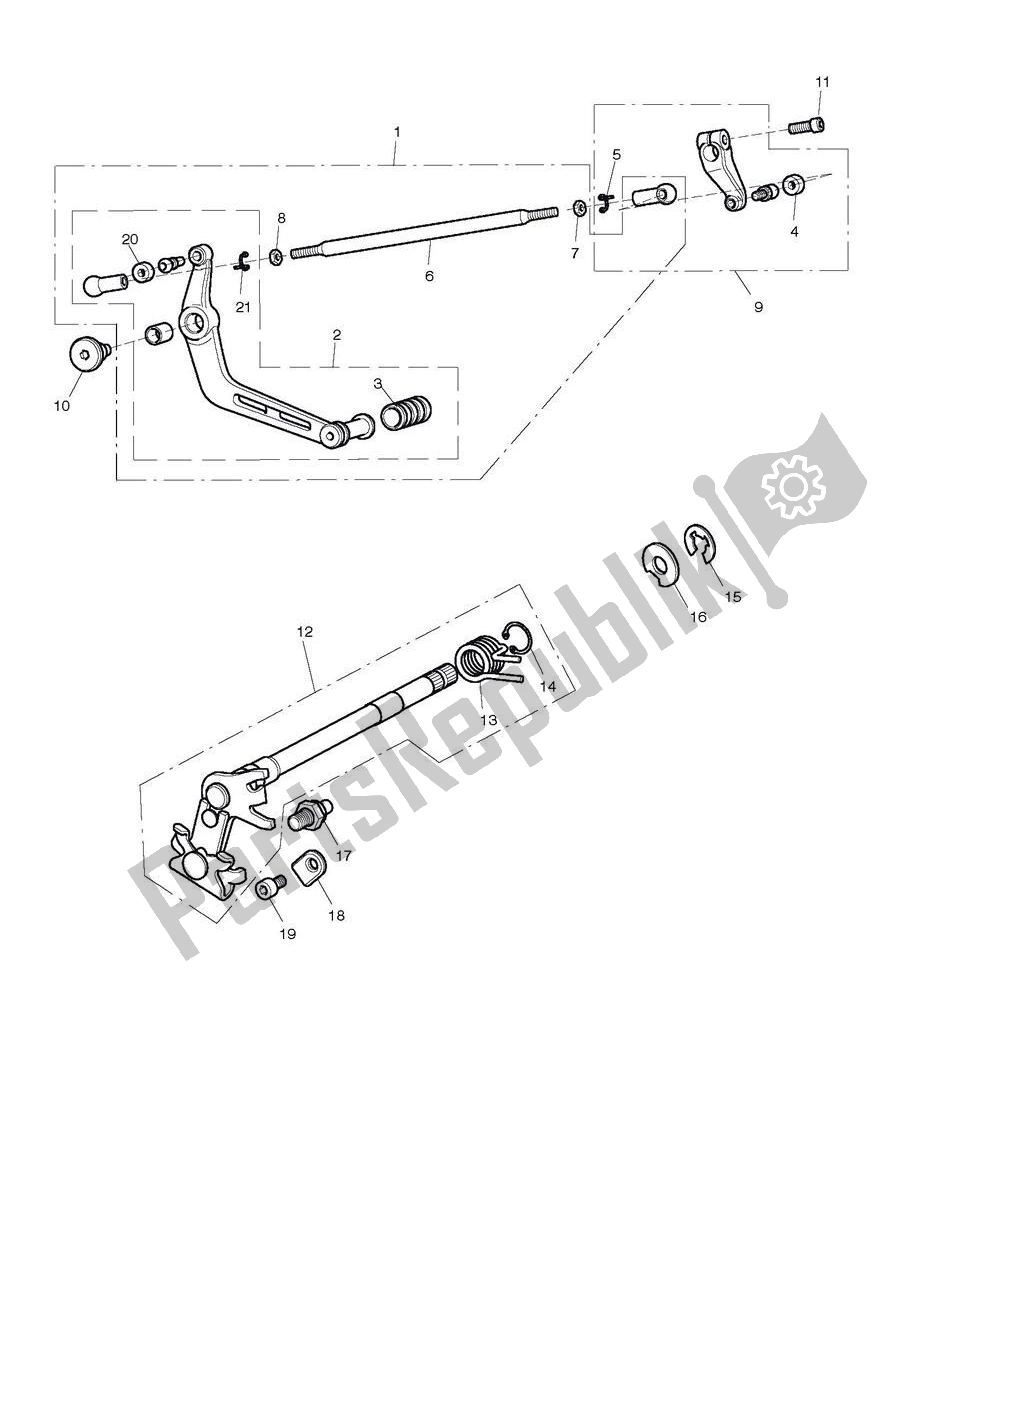 All parts for the Gear Change Mechanism of the Triumph Street Triple 675 2008 - 2012